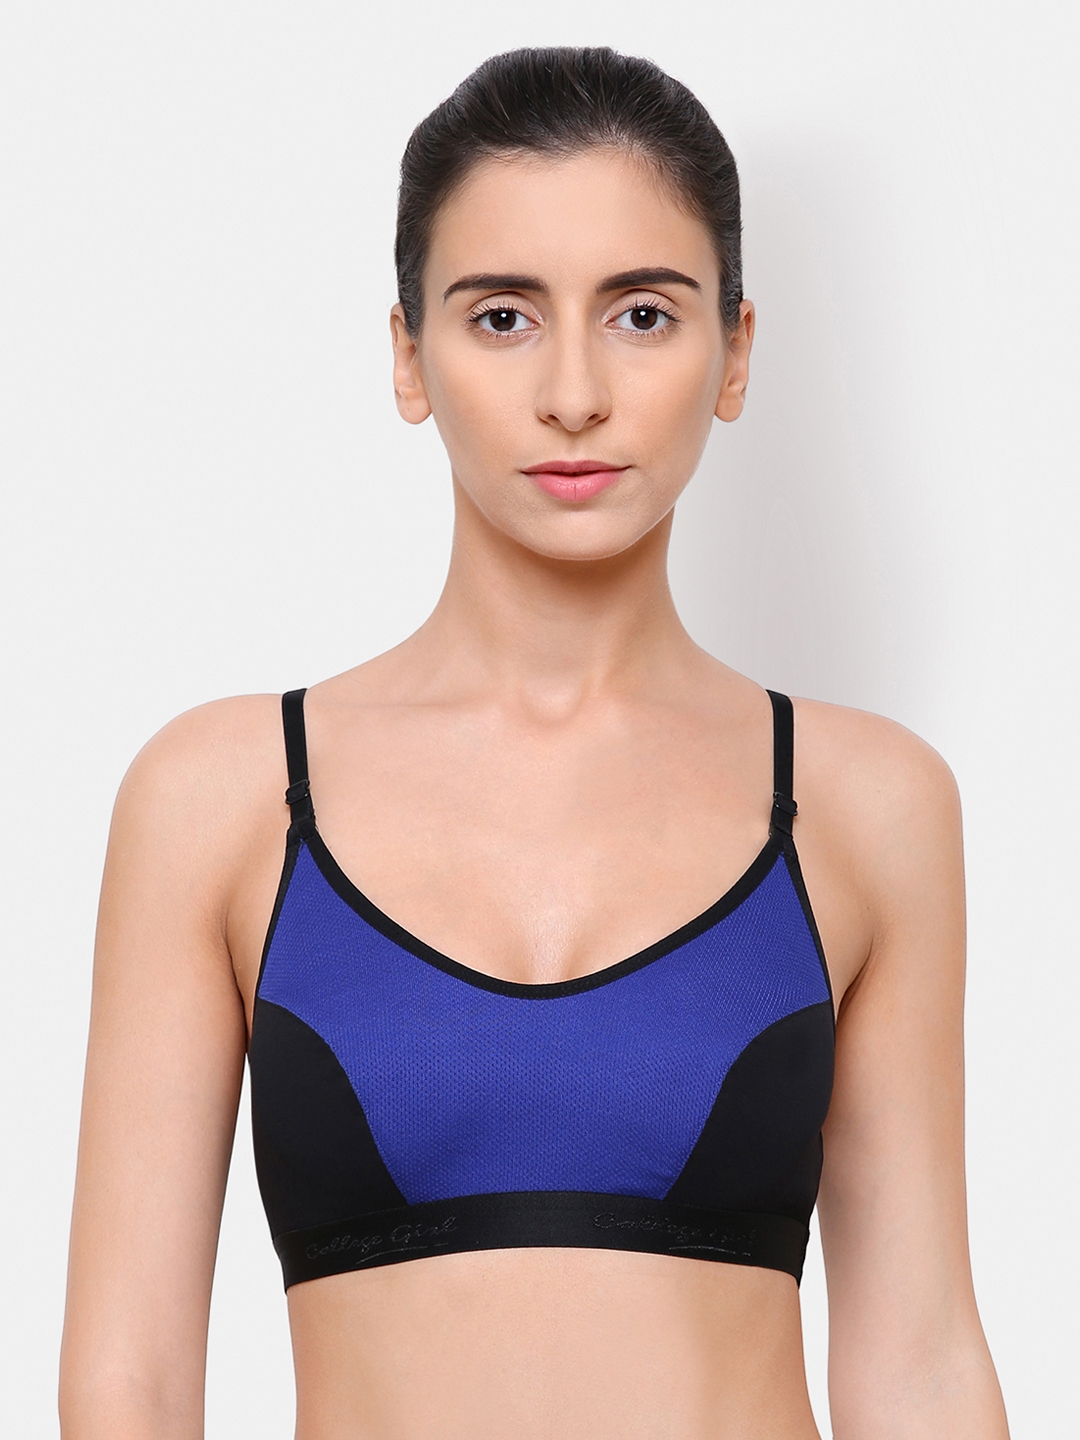 Buy College Girl Blue Black Colourblocked Non Wired N